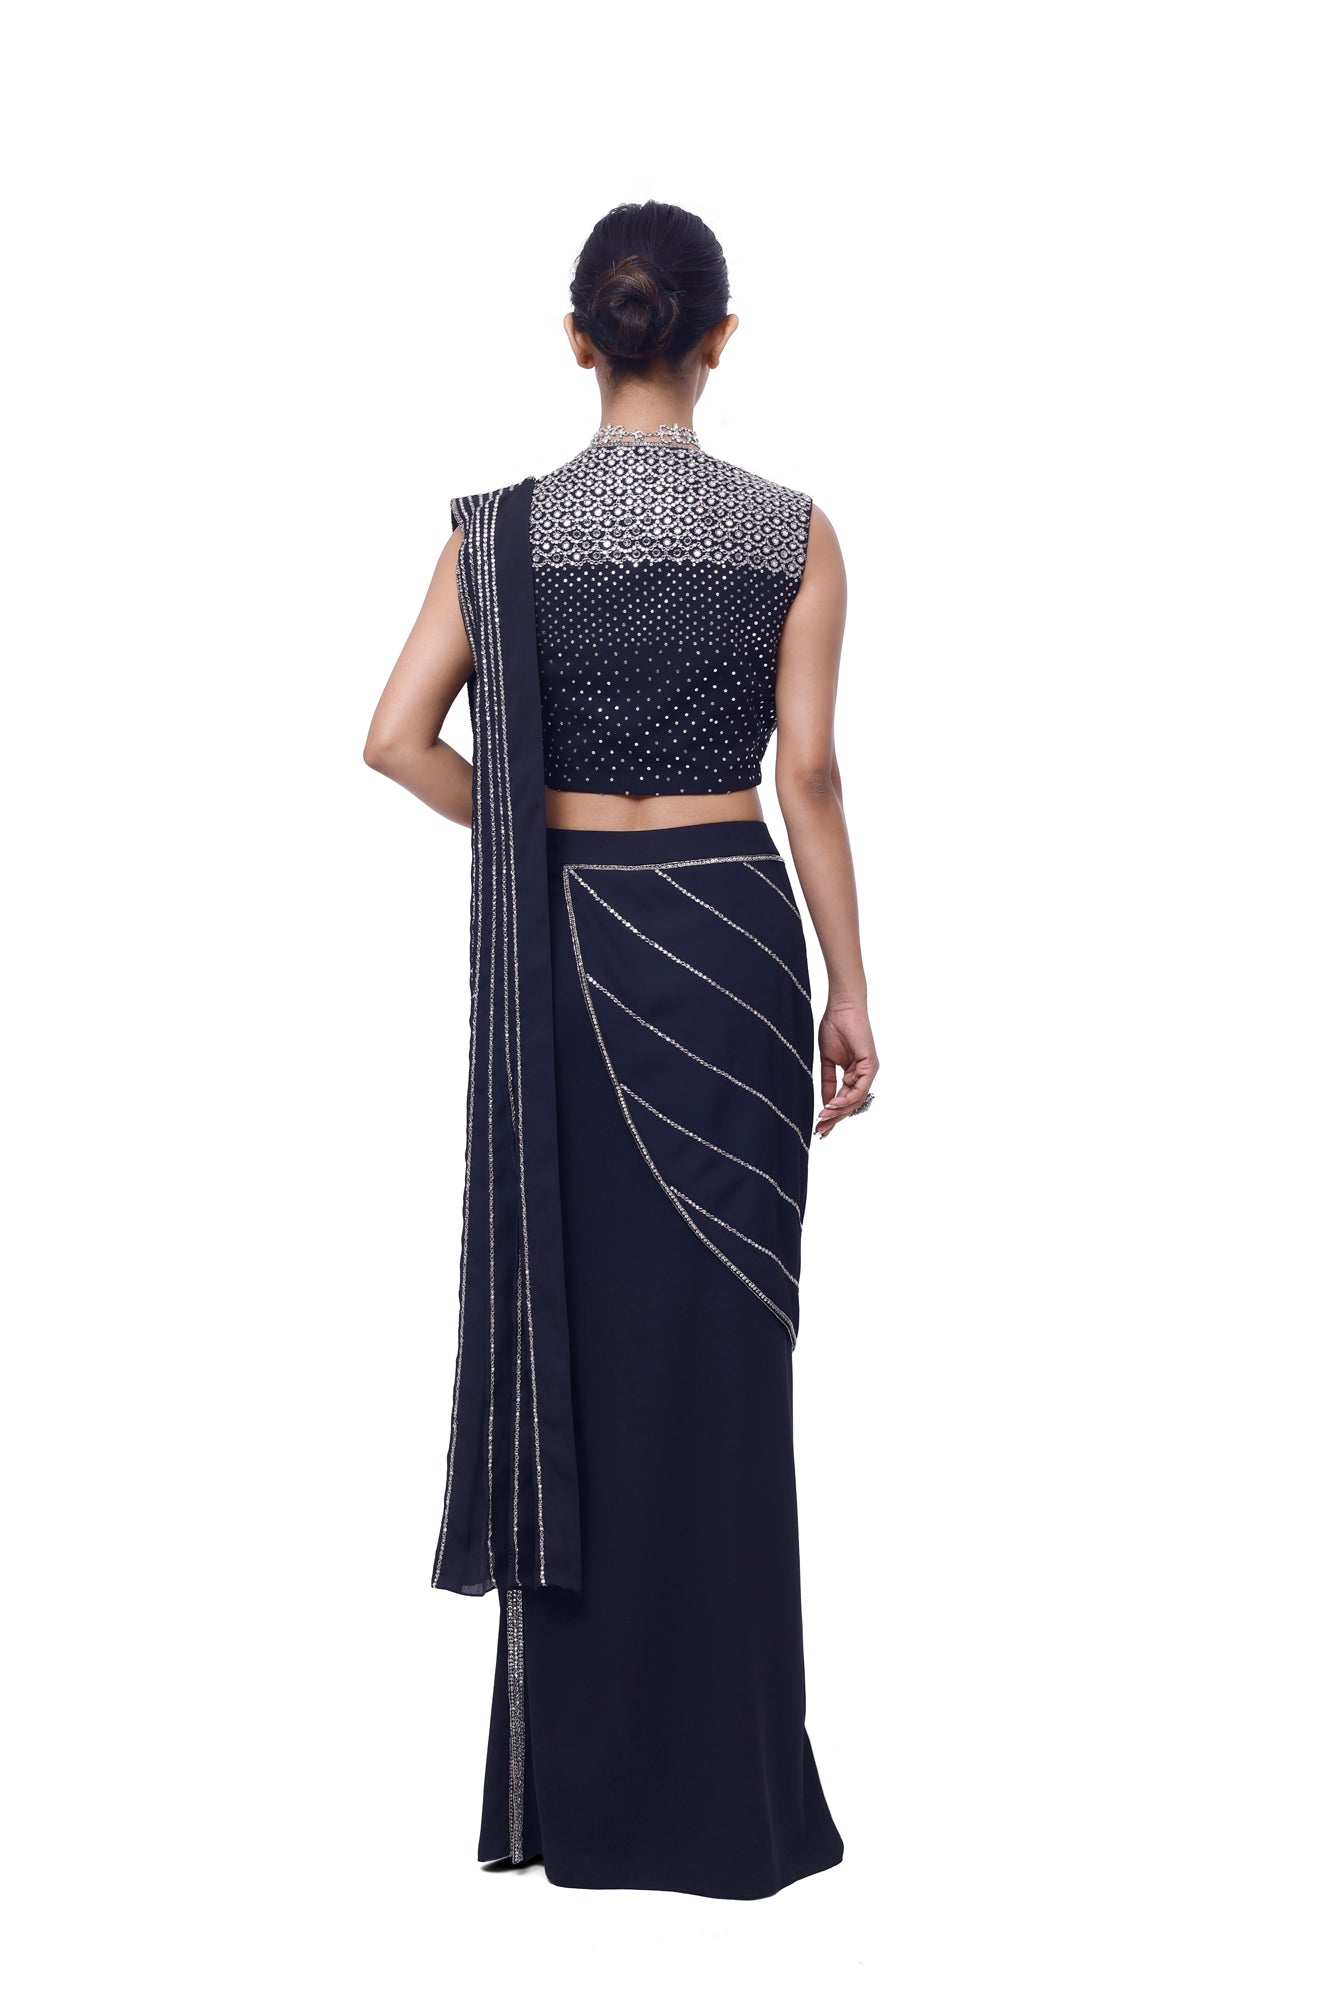 Shop navy blue side slit georgette saree online in USA. Look your best at parties and weddings in beautiful designer sarees, embroidered sarees, handwoven sarees, silk sarees, organza saris from Pure Elegance Indian saree store in USA.-back